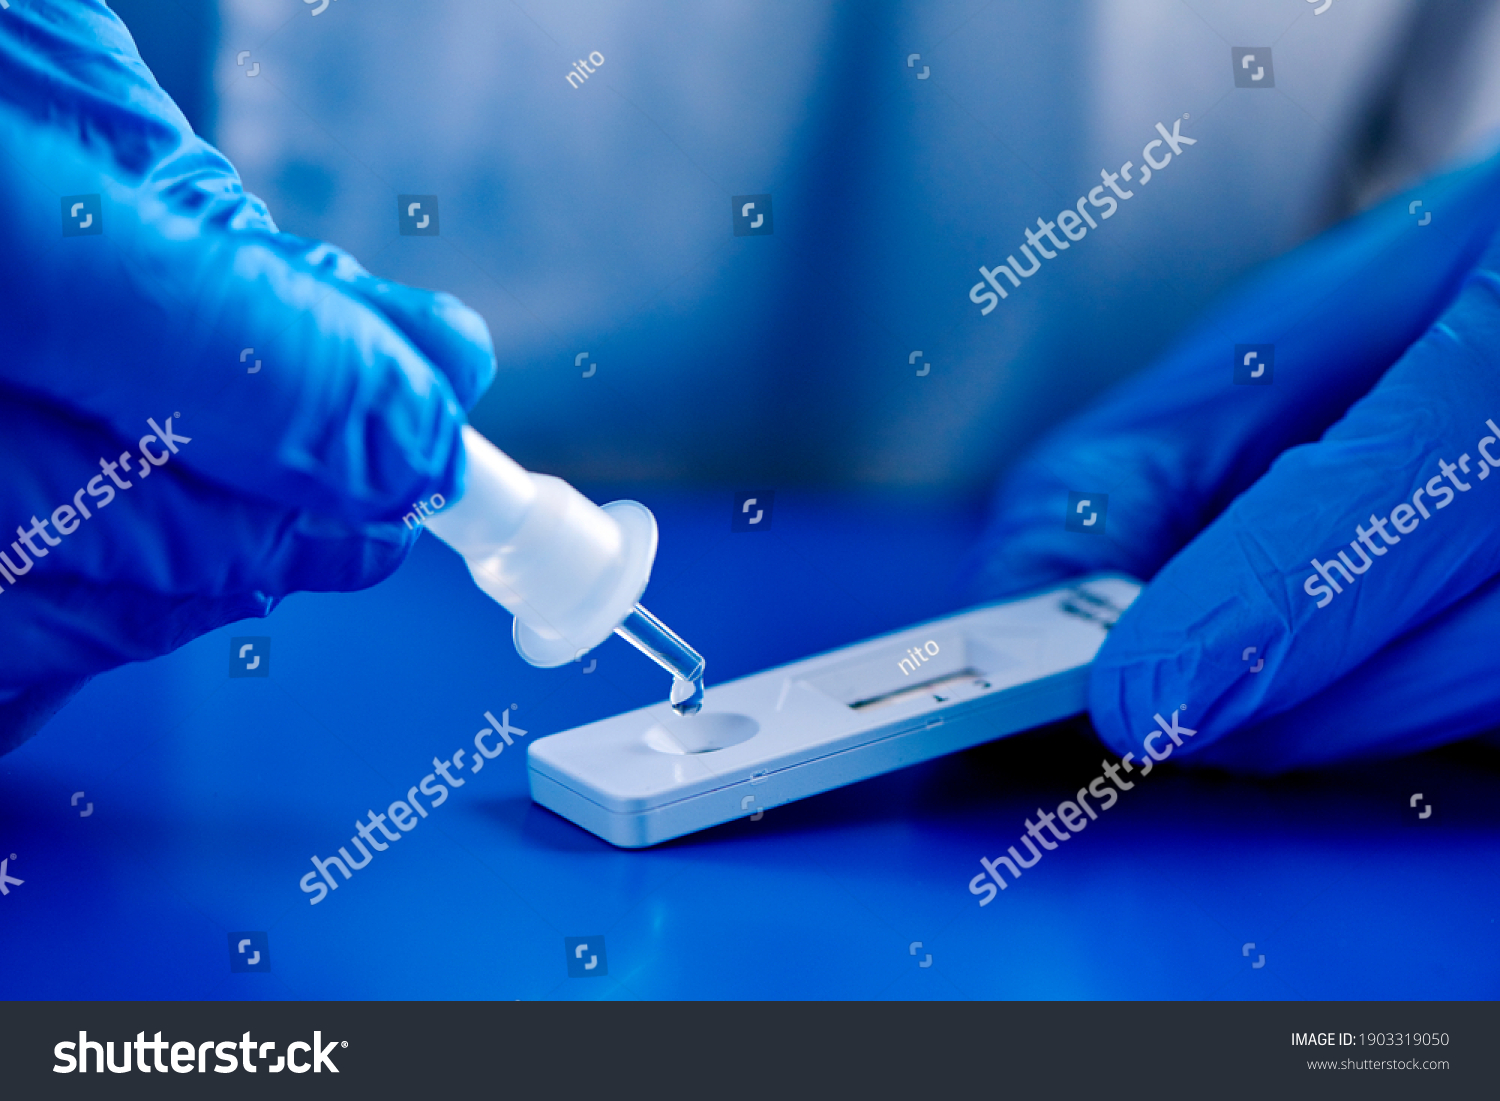 closeup of a man, wearing blue surgical gloves, placing the sample into the covid-19 antigen diagnostic test device, on a blue surface #1903319050